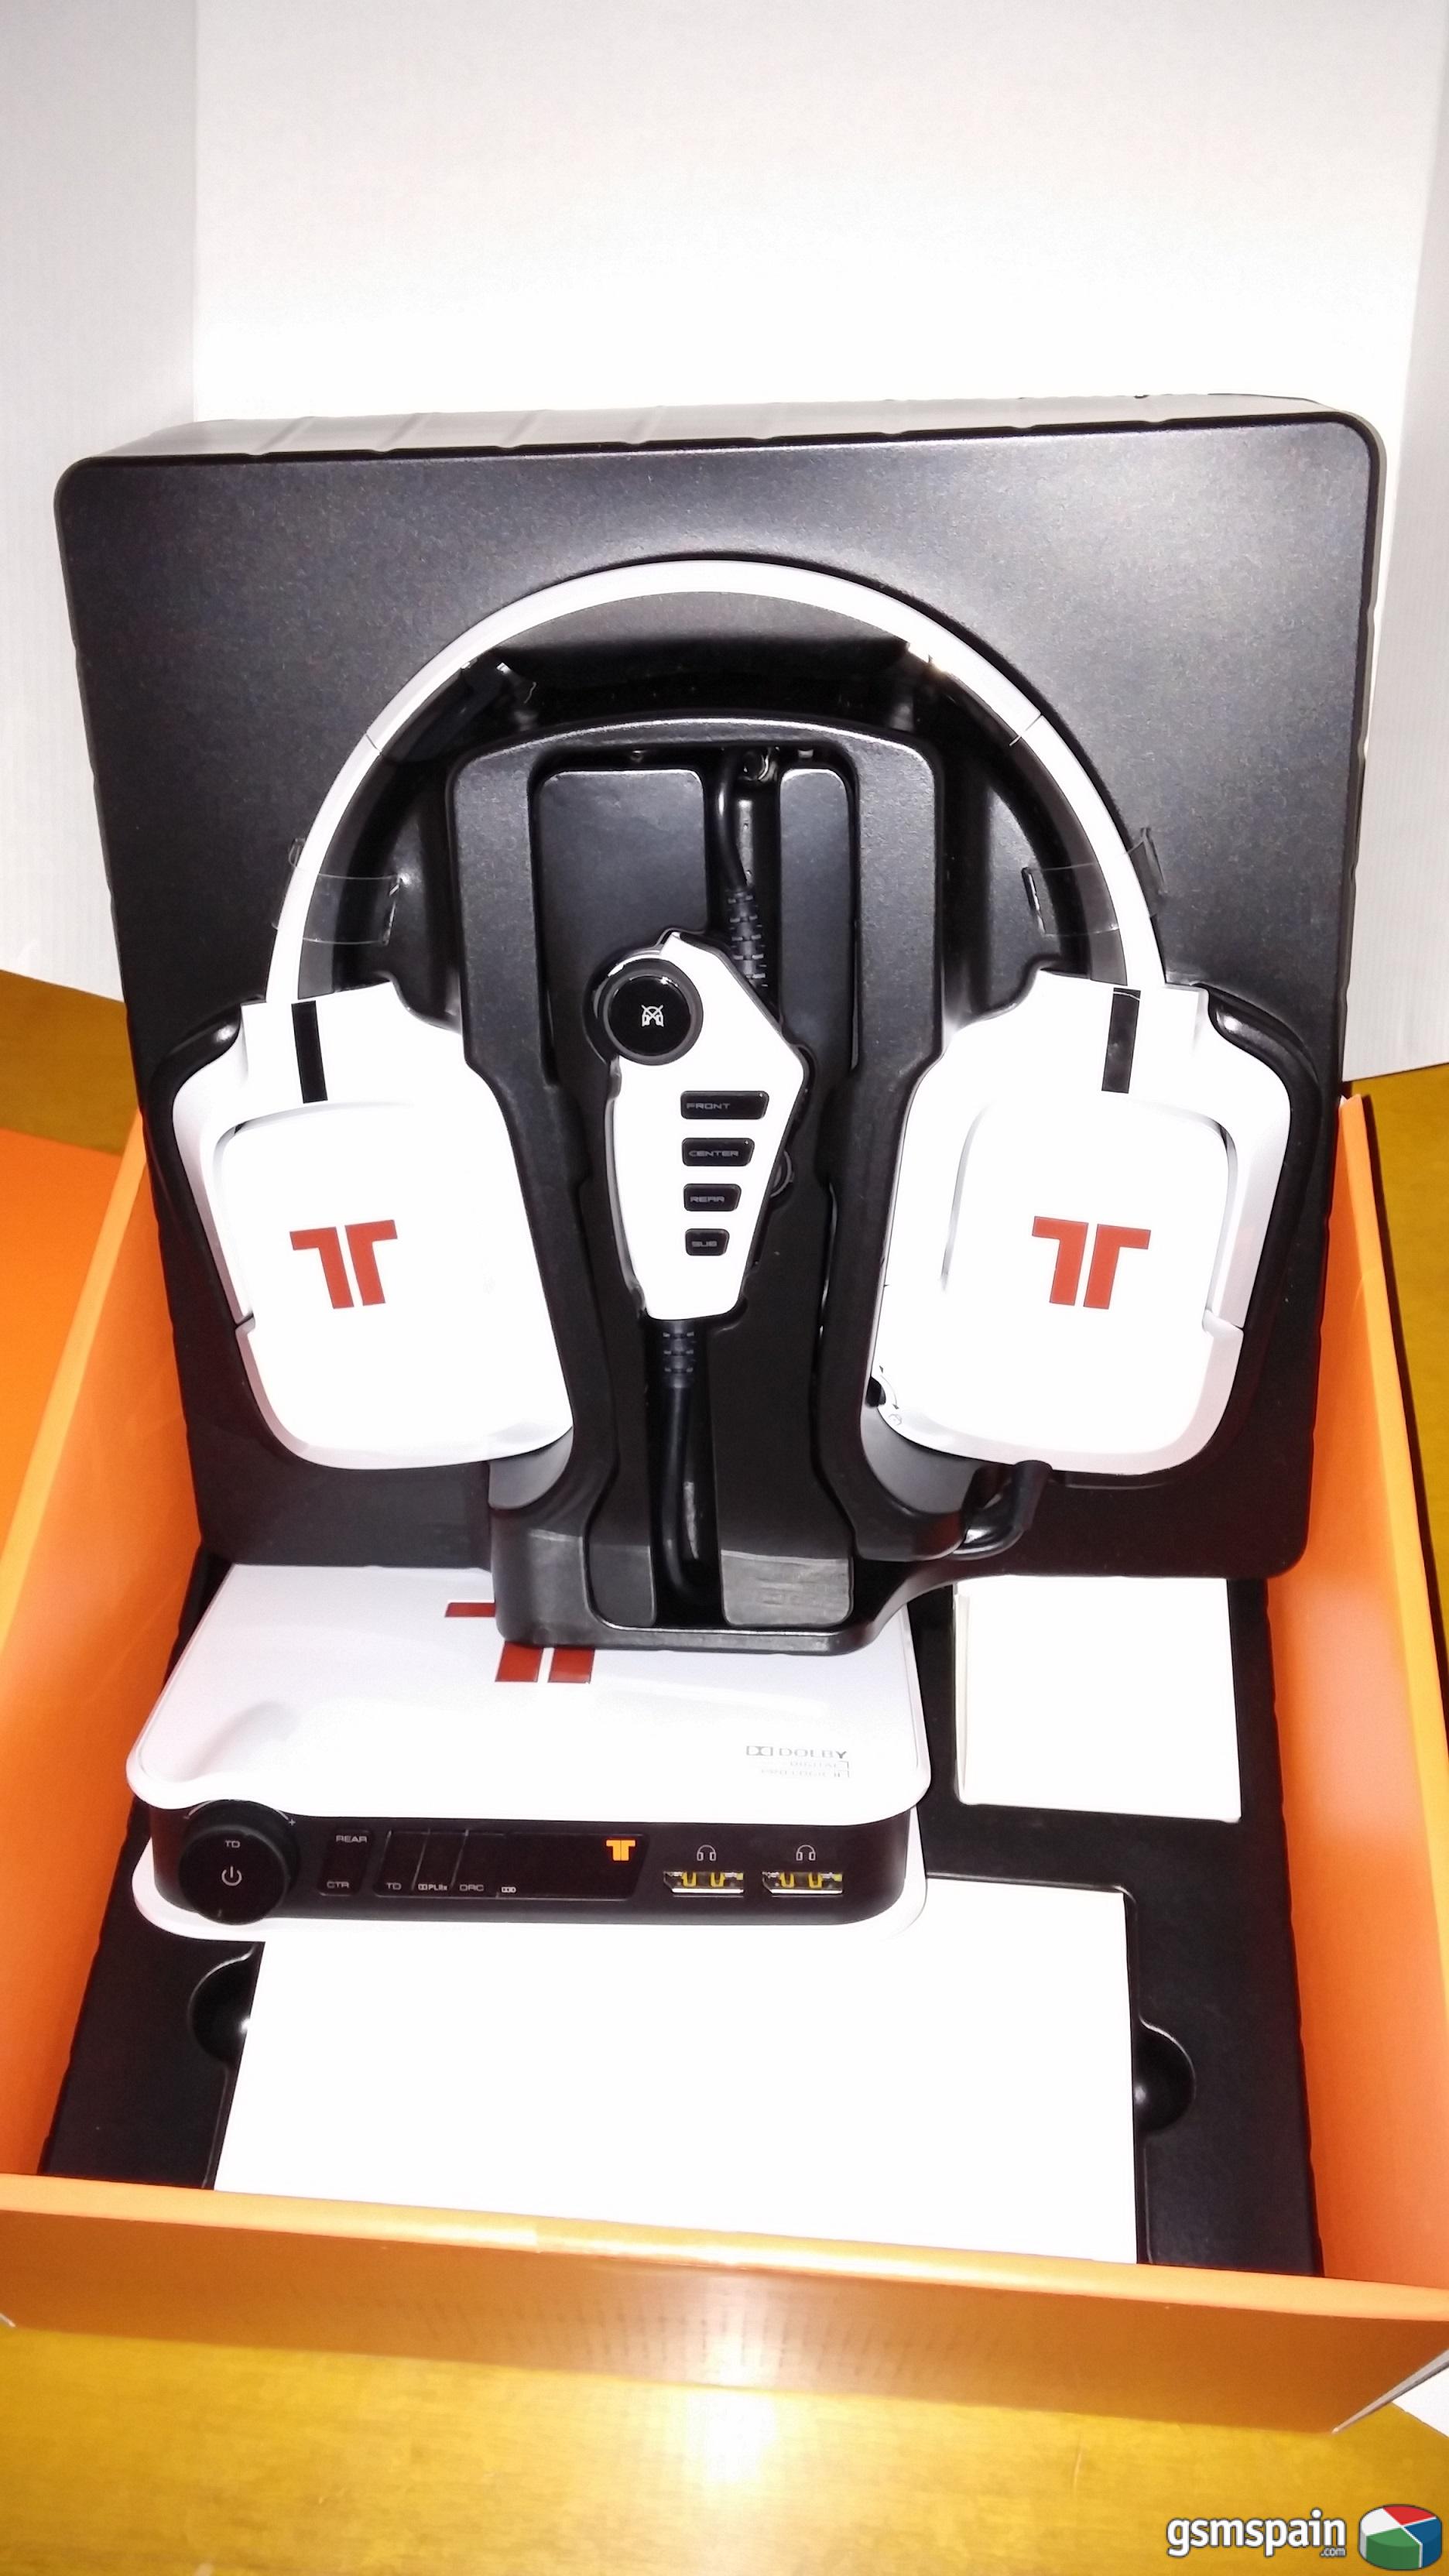 [VENDO] Tritton AX PRO Plus - Auriculares Dolby 5.1 (Pc-Ps3-Ps4-X360)